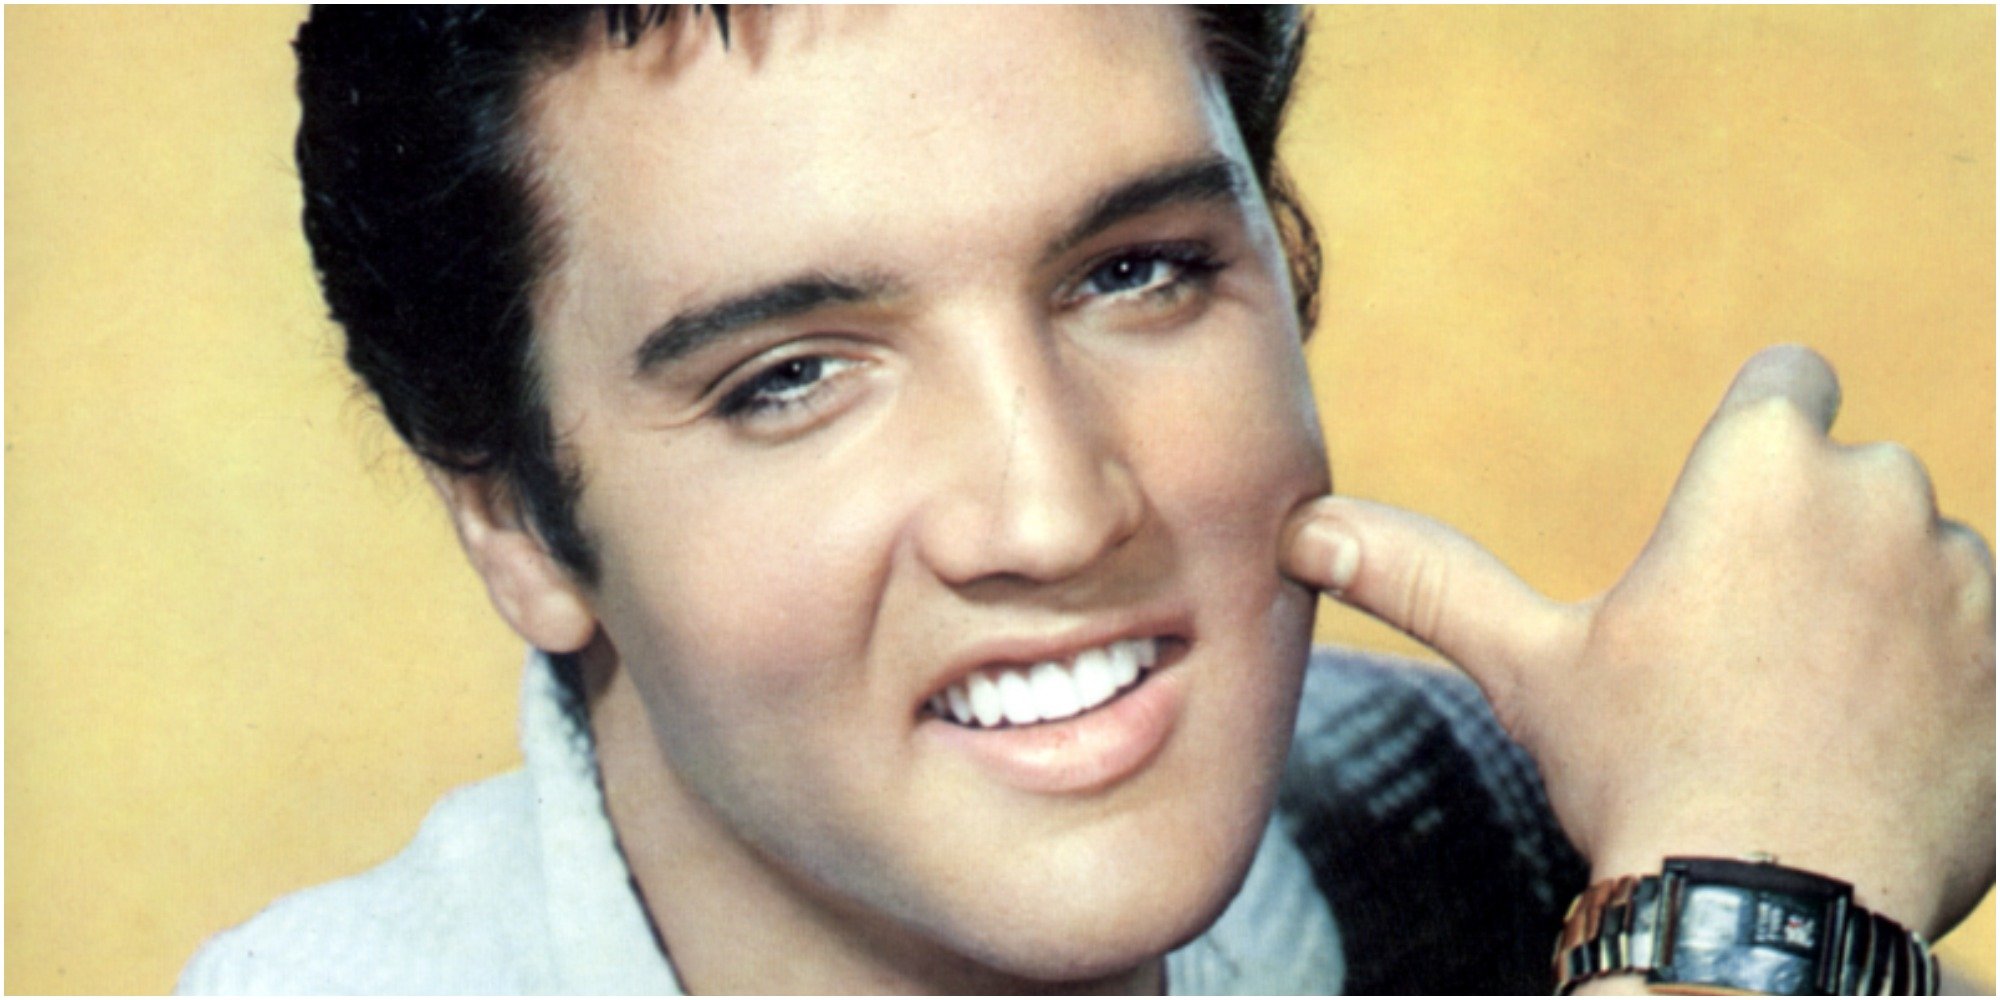 Elvis Presley in a promotional photograph.